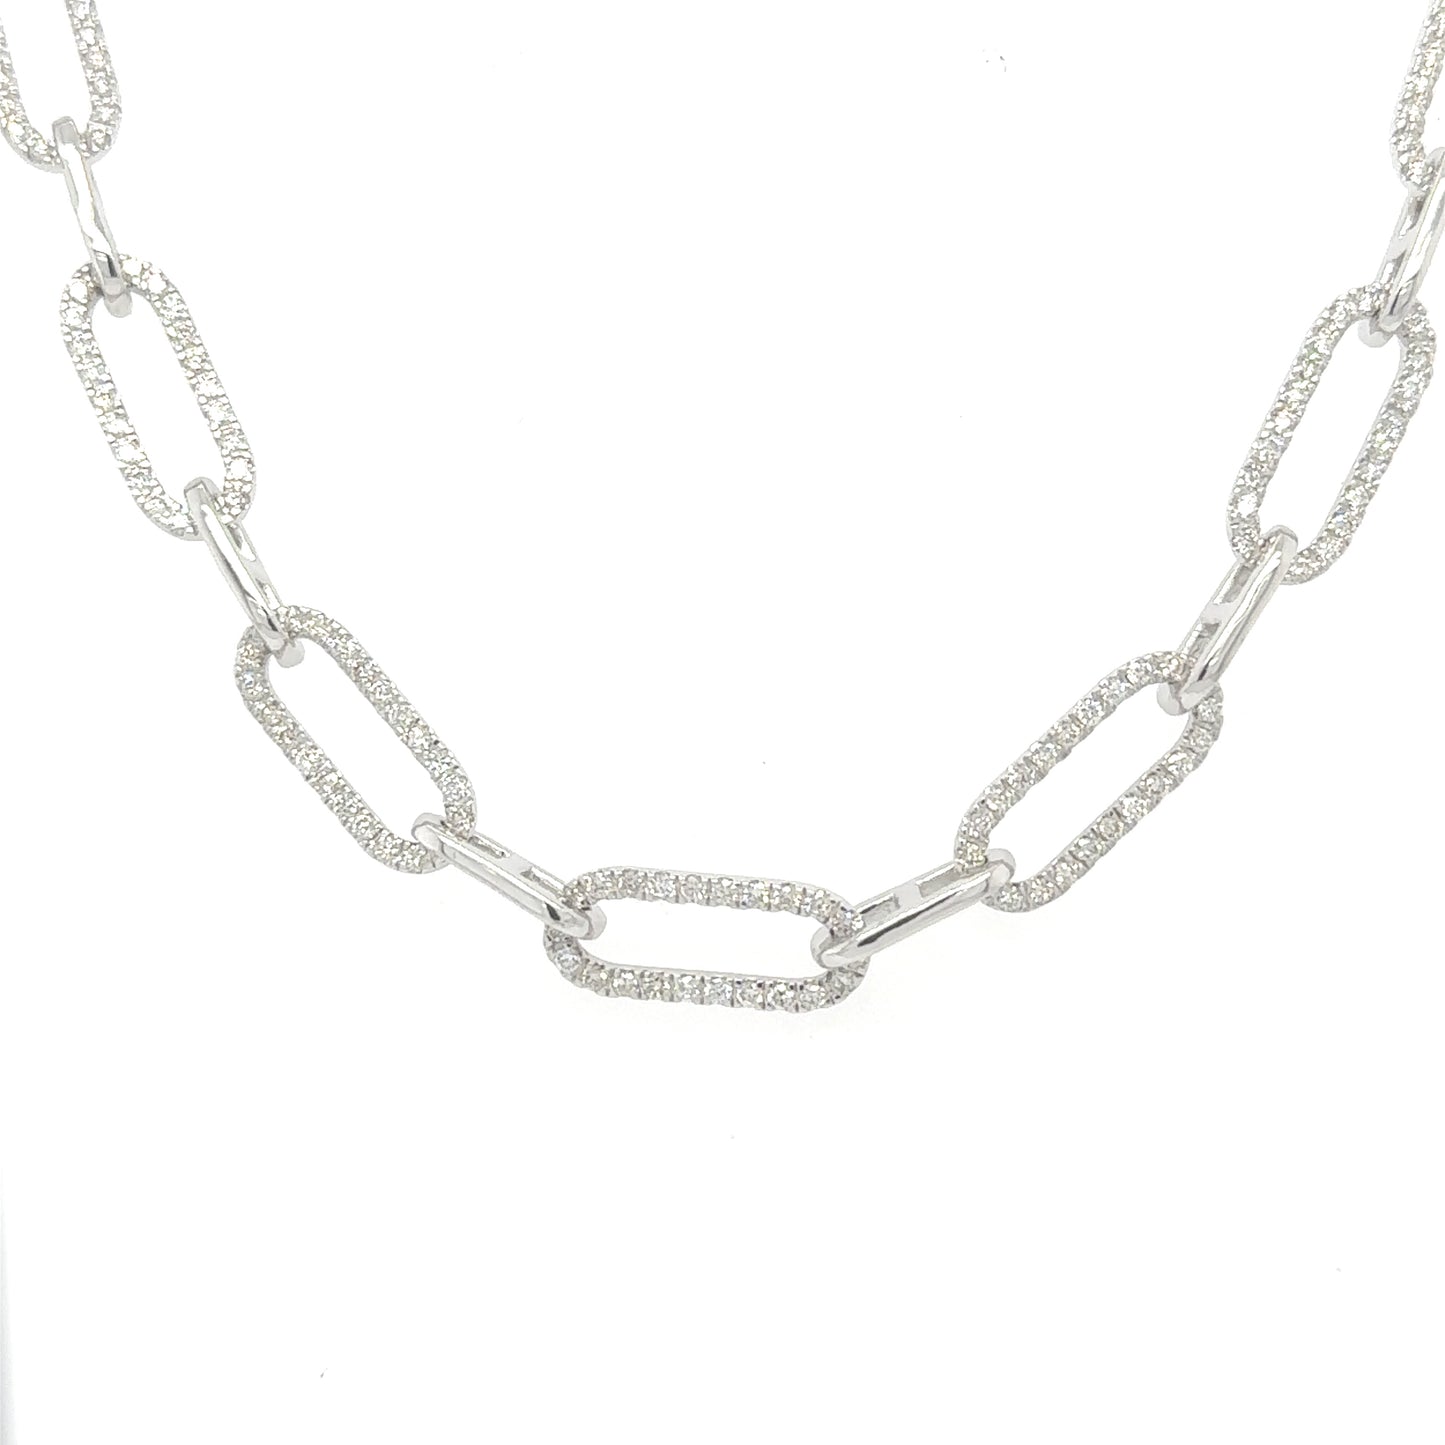 14K white gold diamond link necklace with 4.09 carats of sparkling diamonds, 18 inches long.